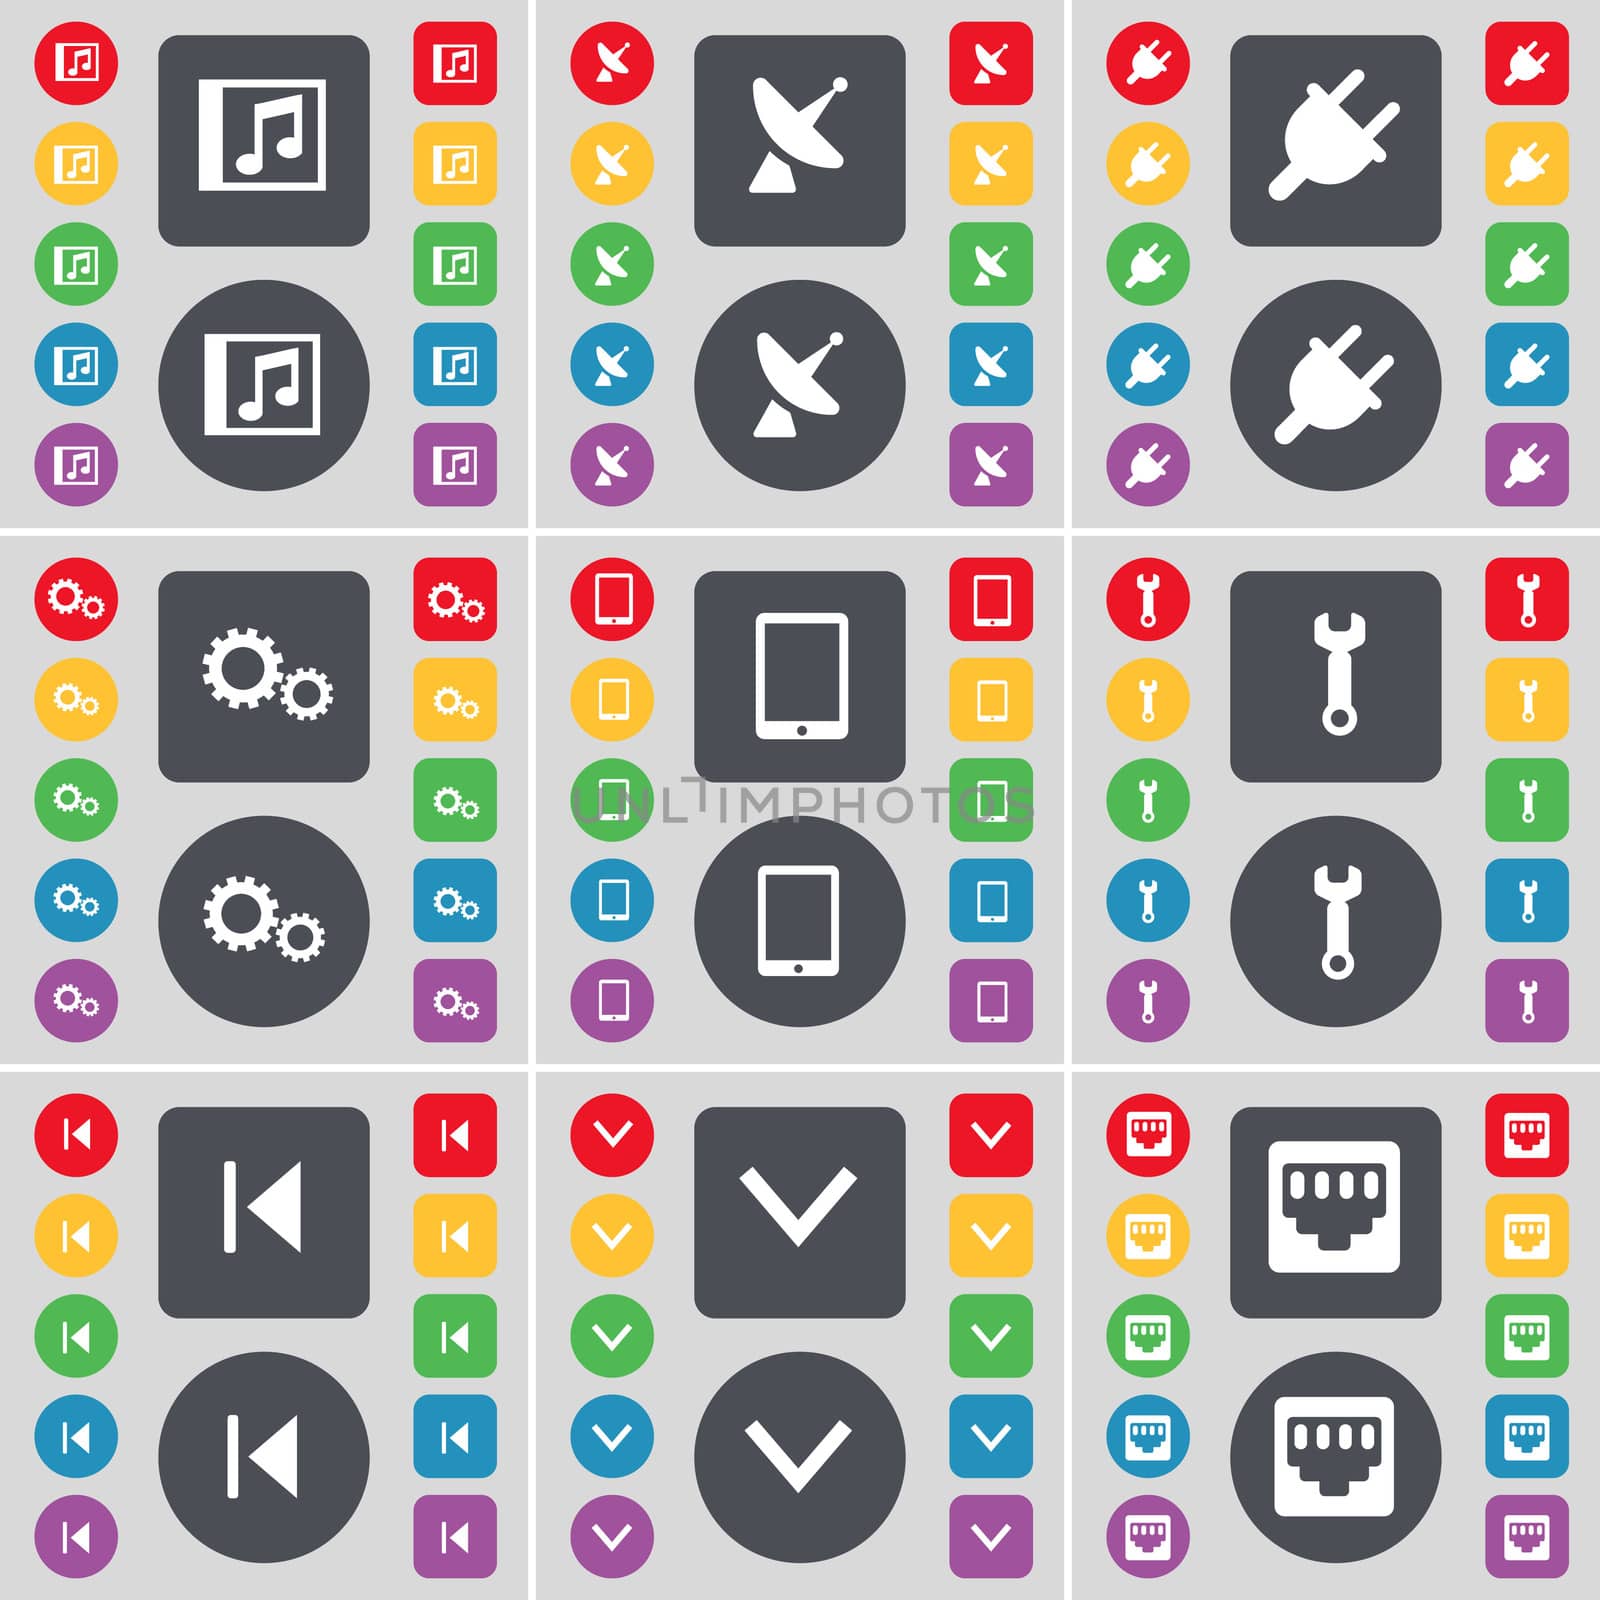 Music window, Satellite dish, Socket, Gear, Tablet PC, Wrench, Media skip, Arrow down, LAN socket icon symbol. A large set of flat, colored buttons for your design. illustration